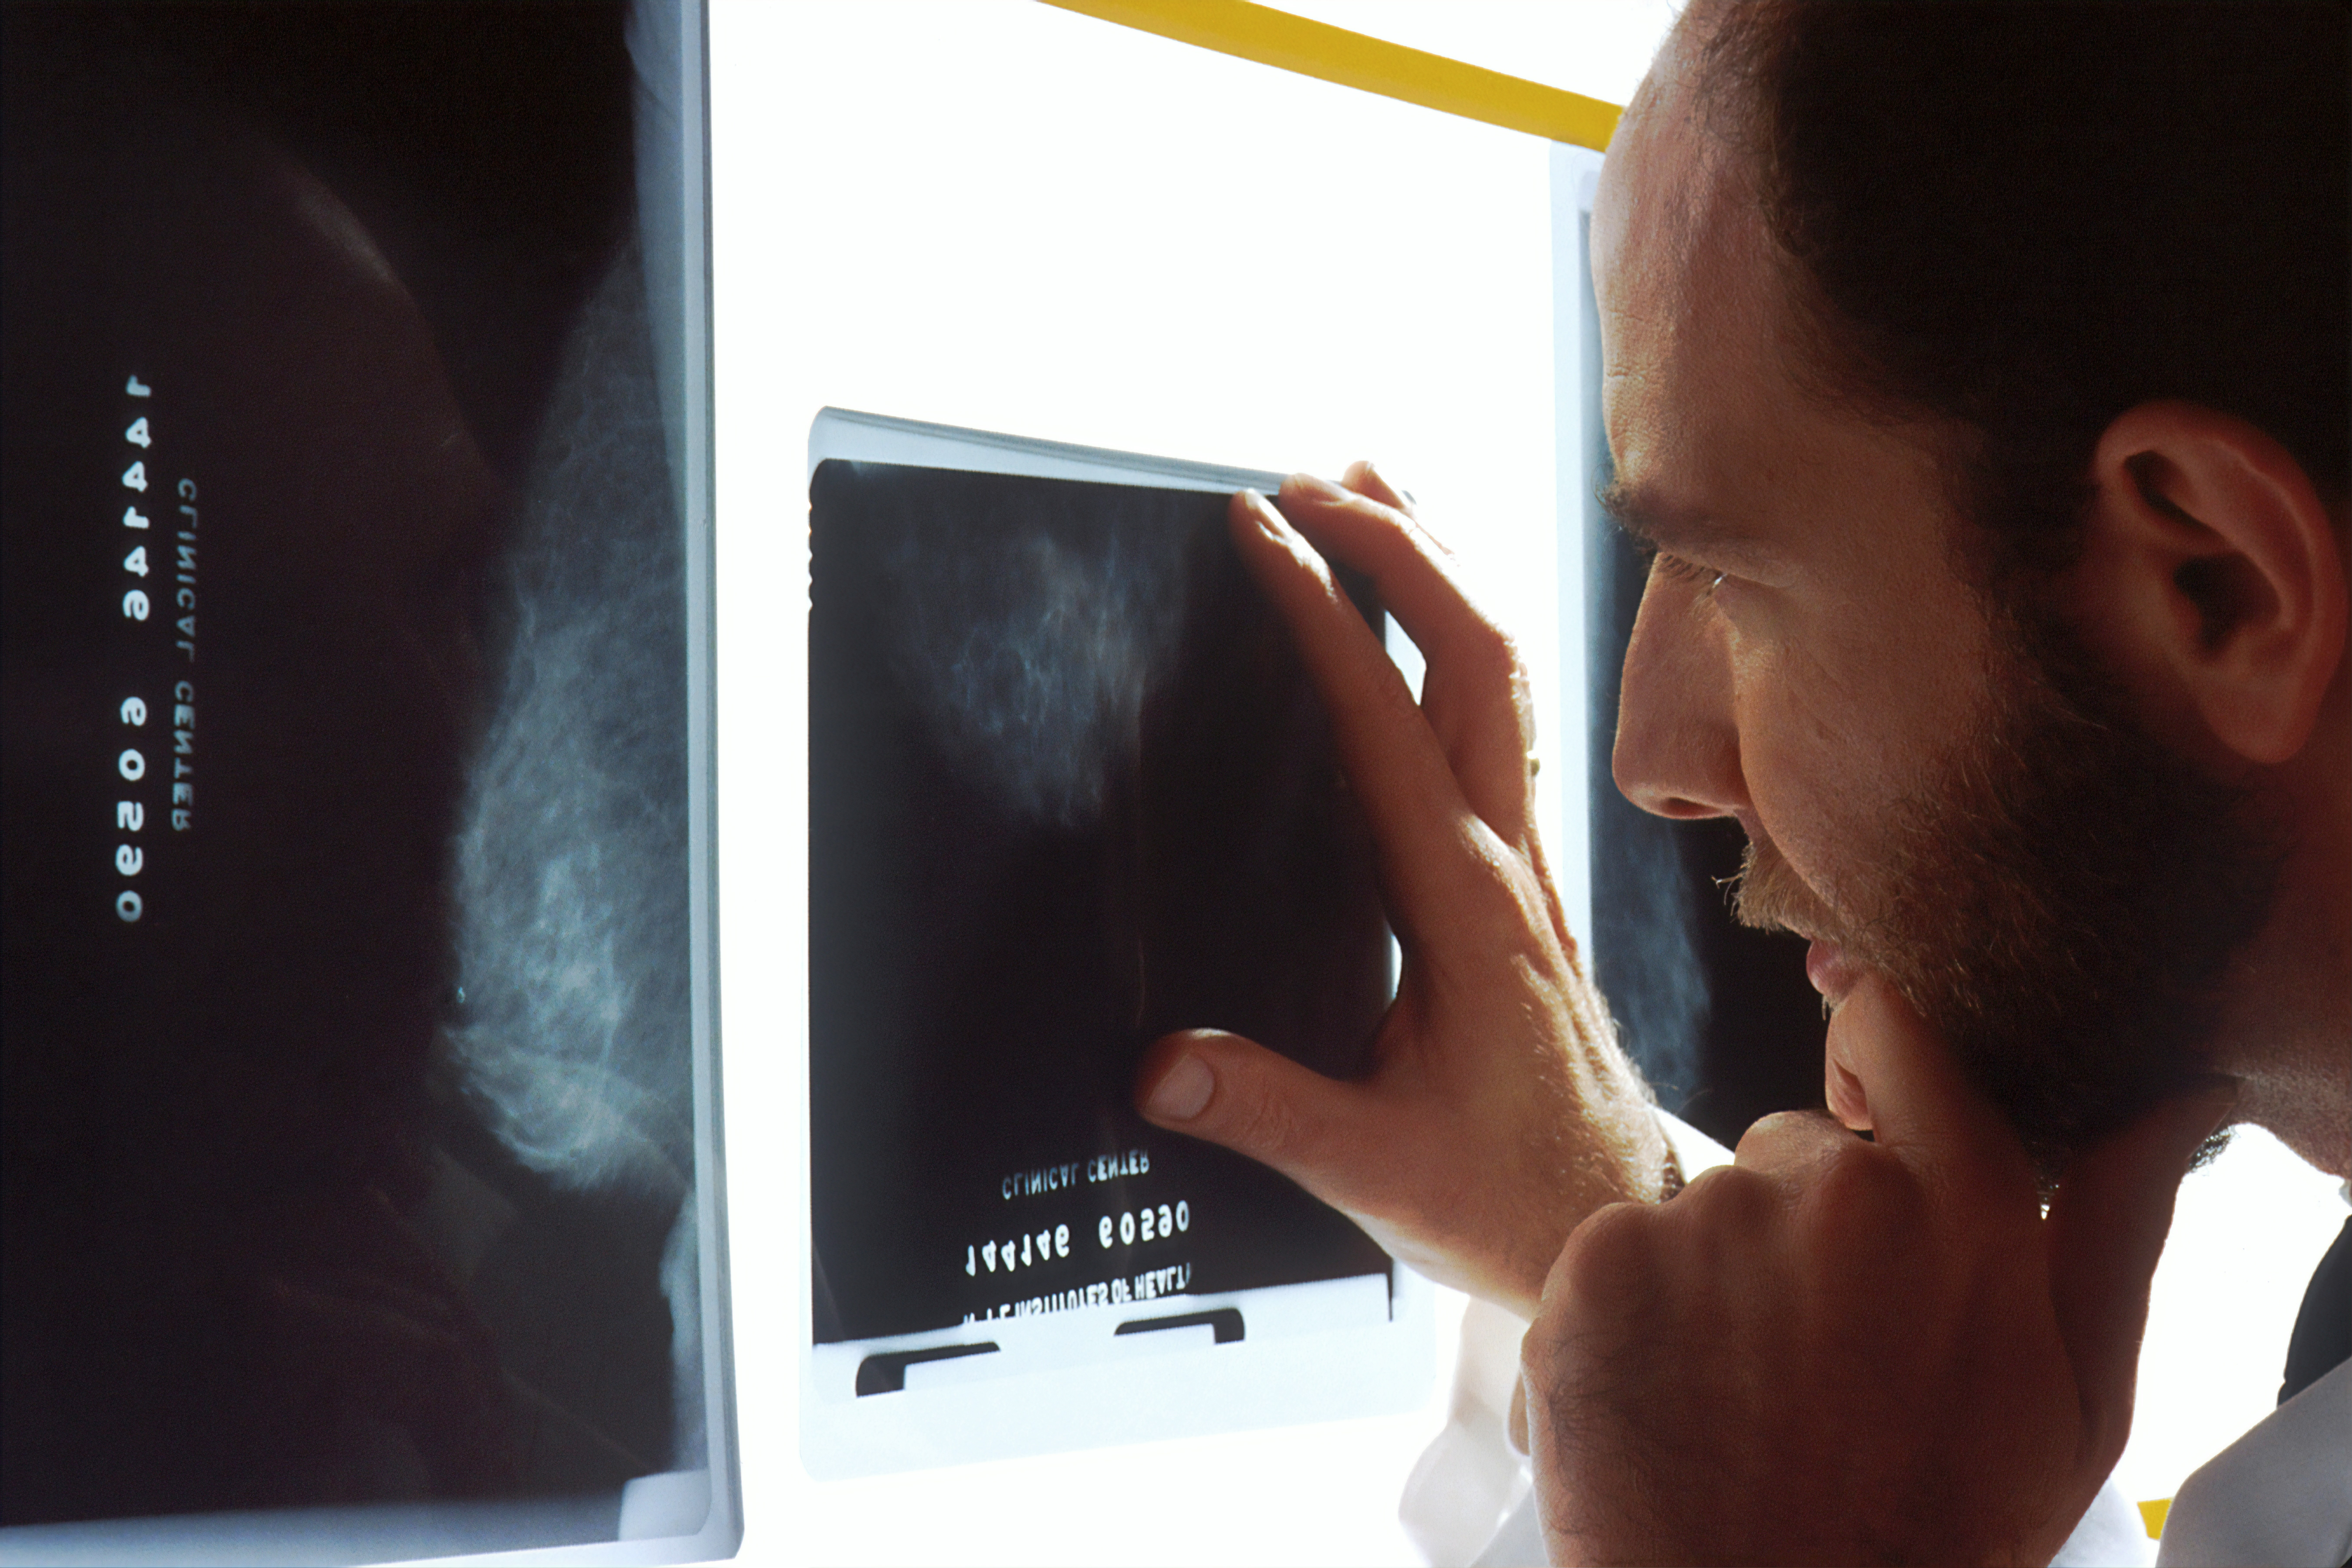 radiotherapy centre - A doctor examines mammograms on a view box